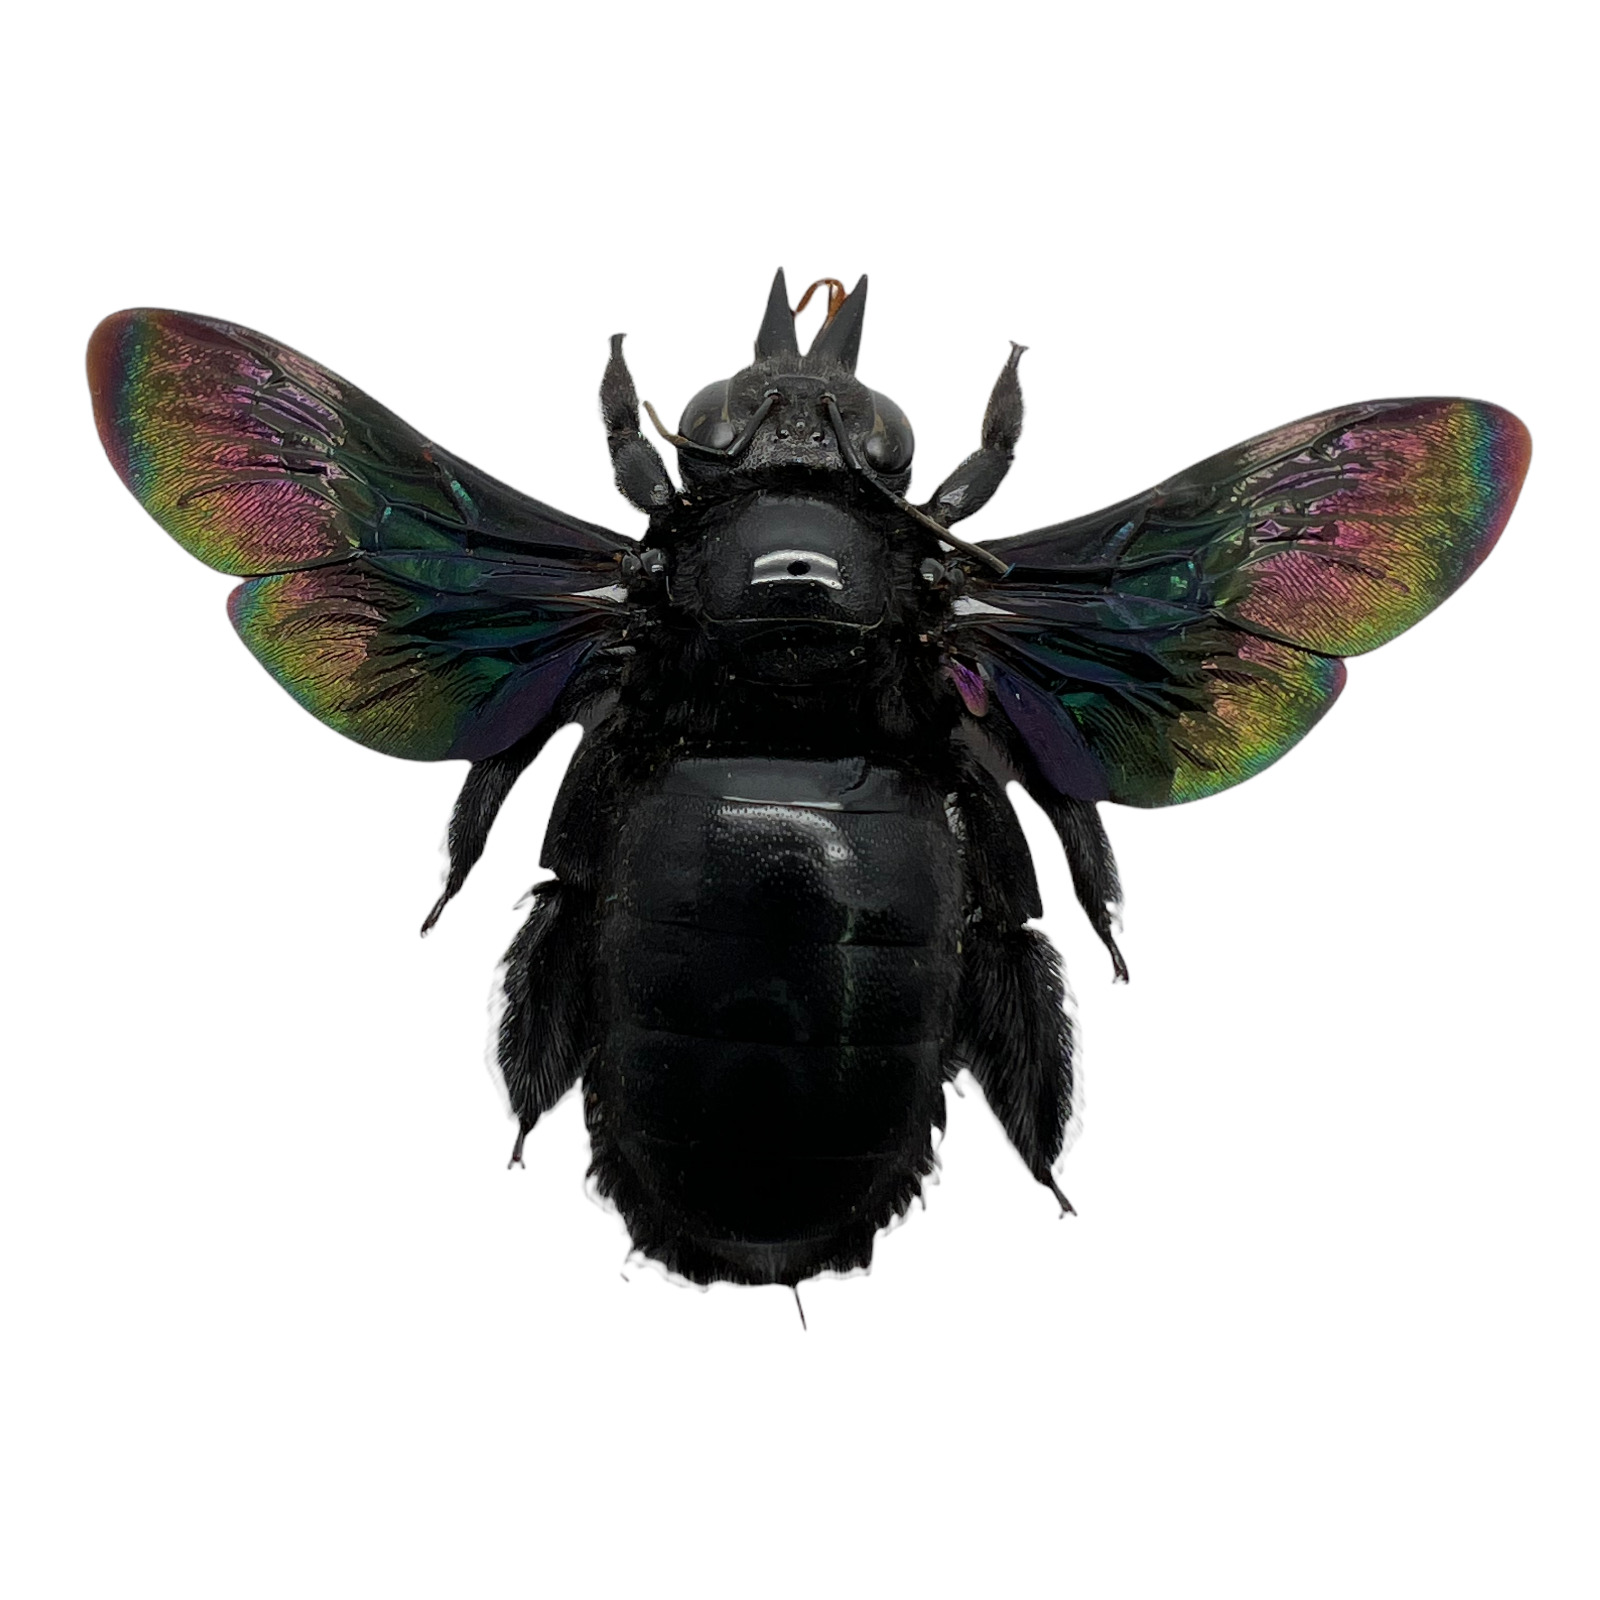 Giant Black Tropical Carpenter Bee Xylocopa Latipes Insect Specimen (F)